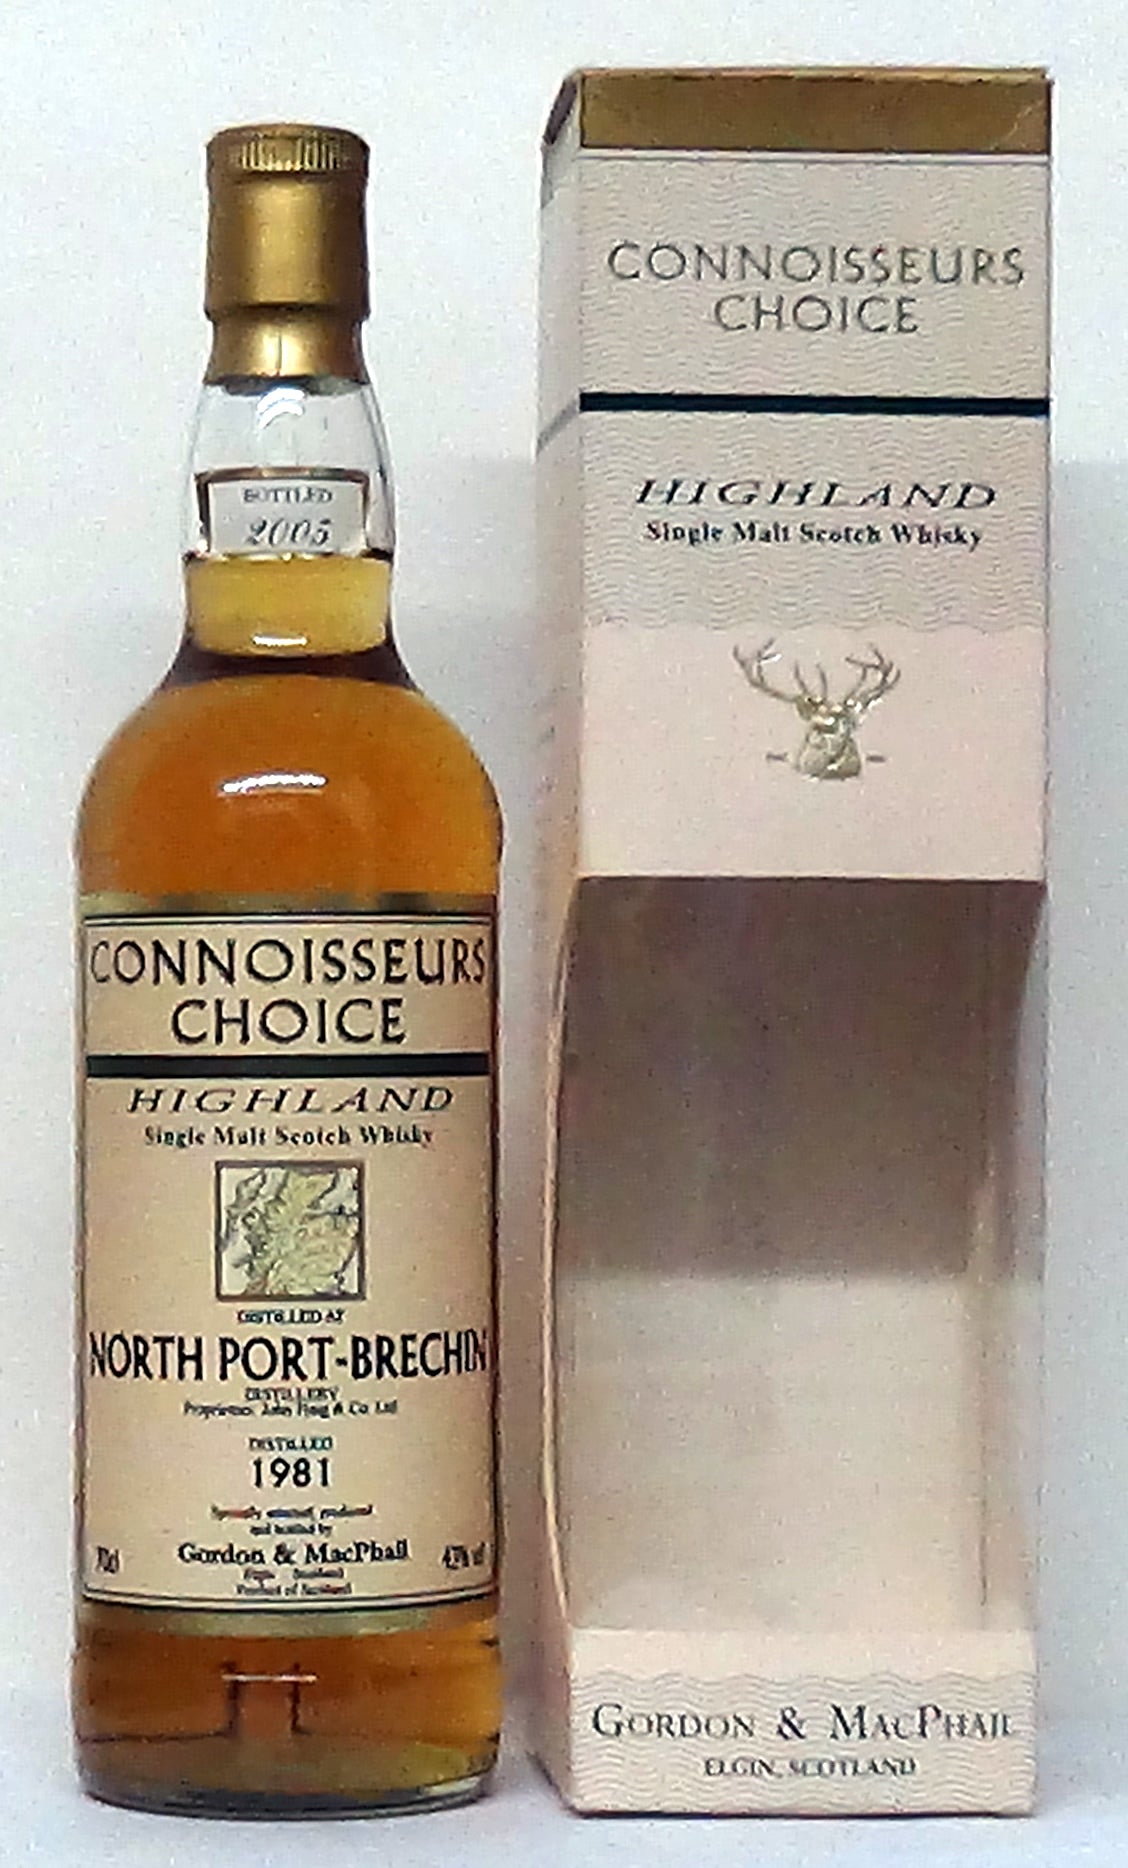 1981 North Port - Brechin 24 Year Old Bottled 2005 Connoisseurs Choice